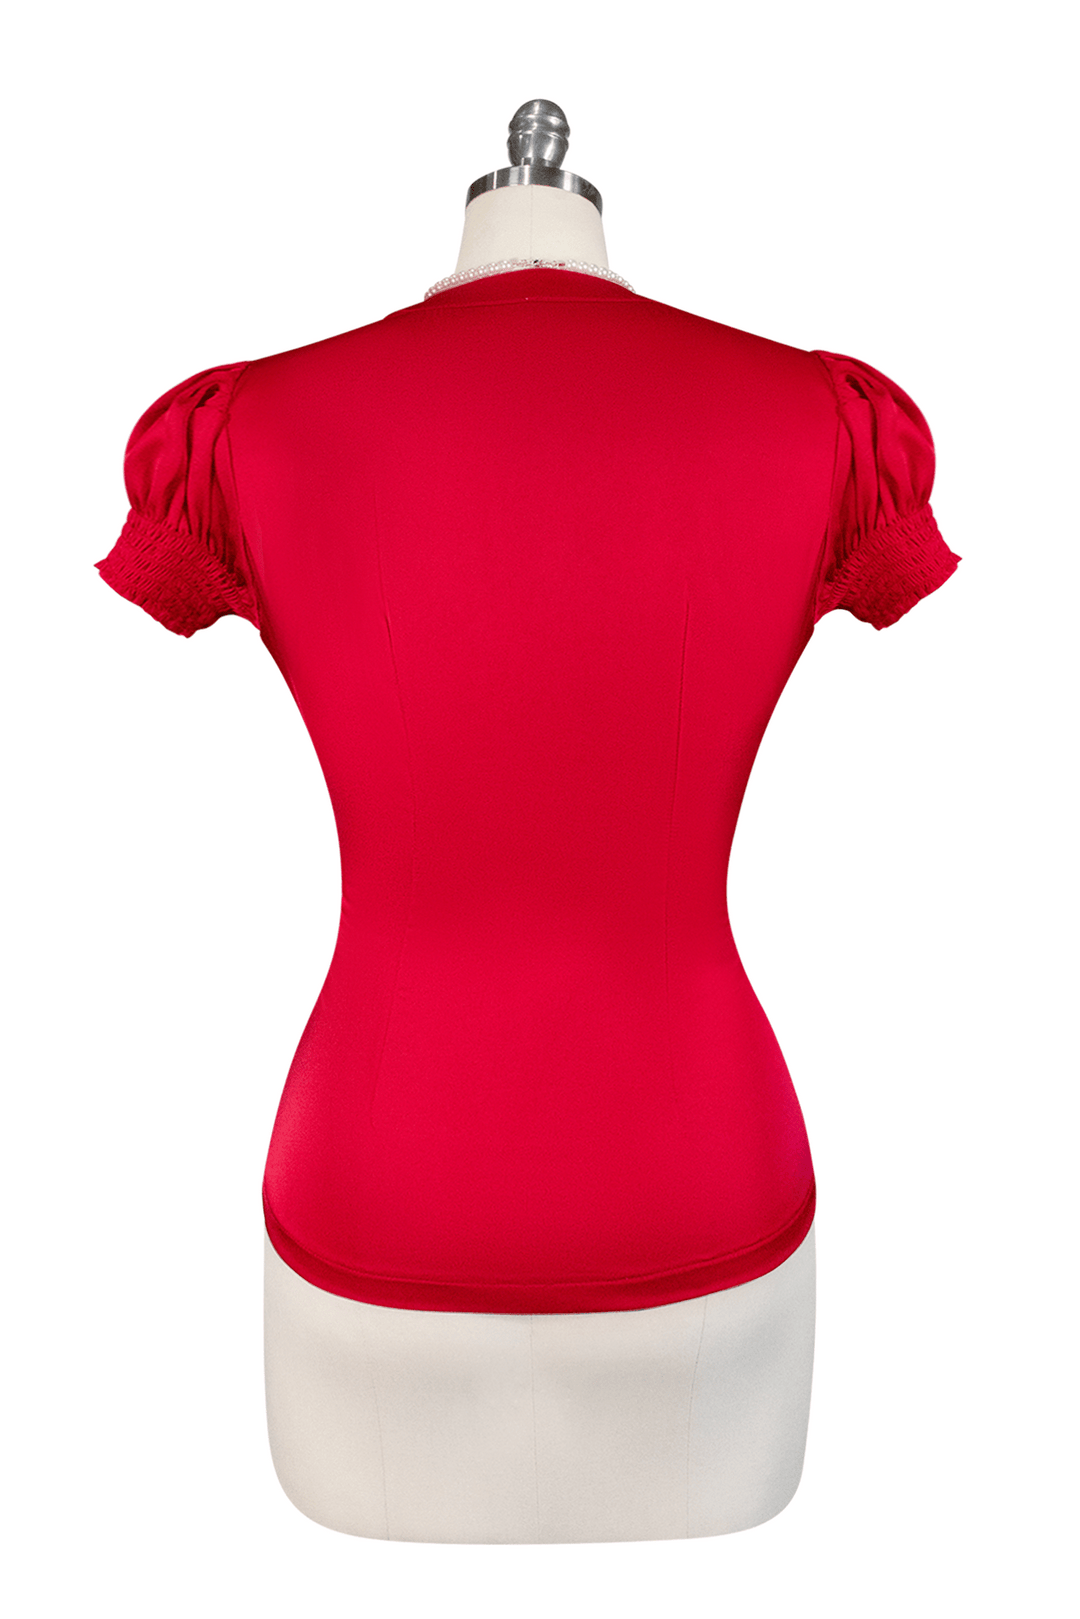 Tea Rose Frill Front Blouse (Red) - Kitten D'Amour